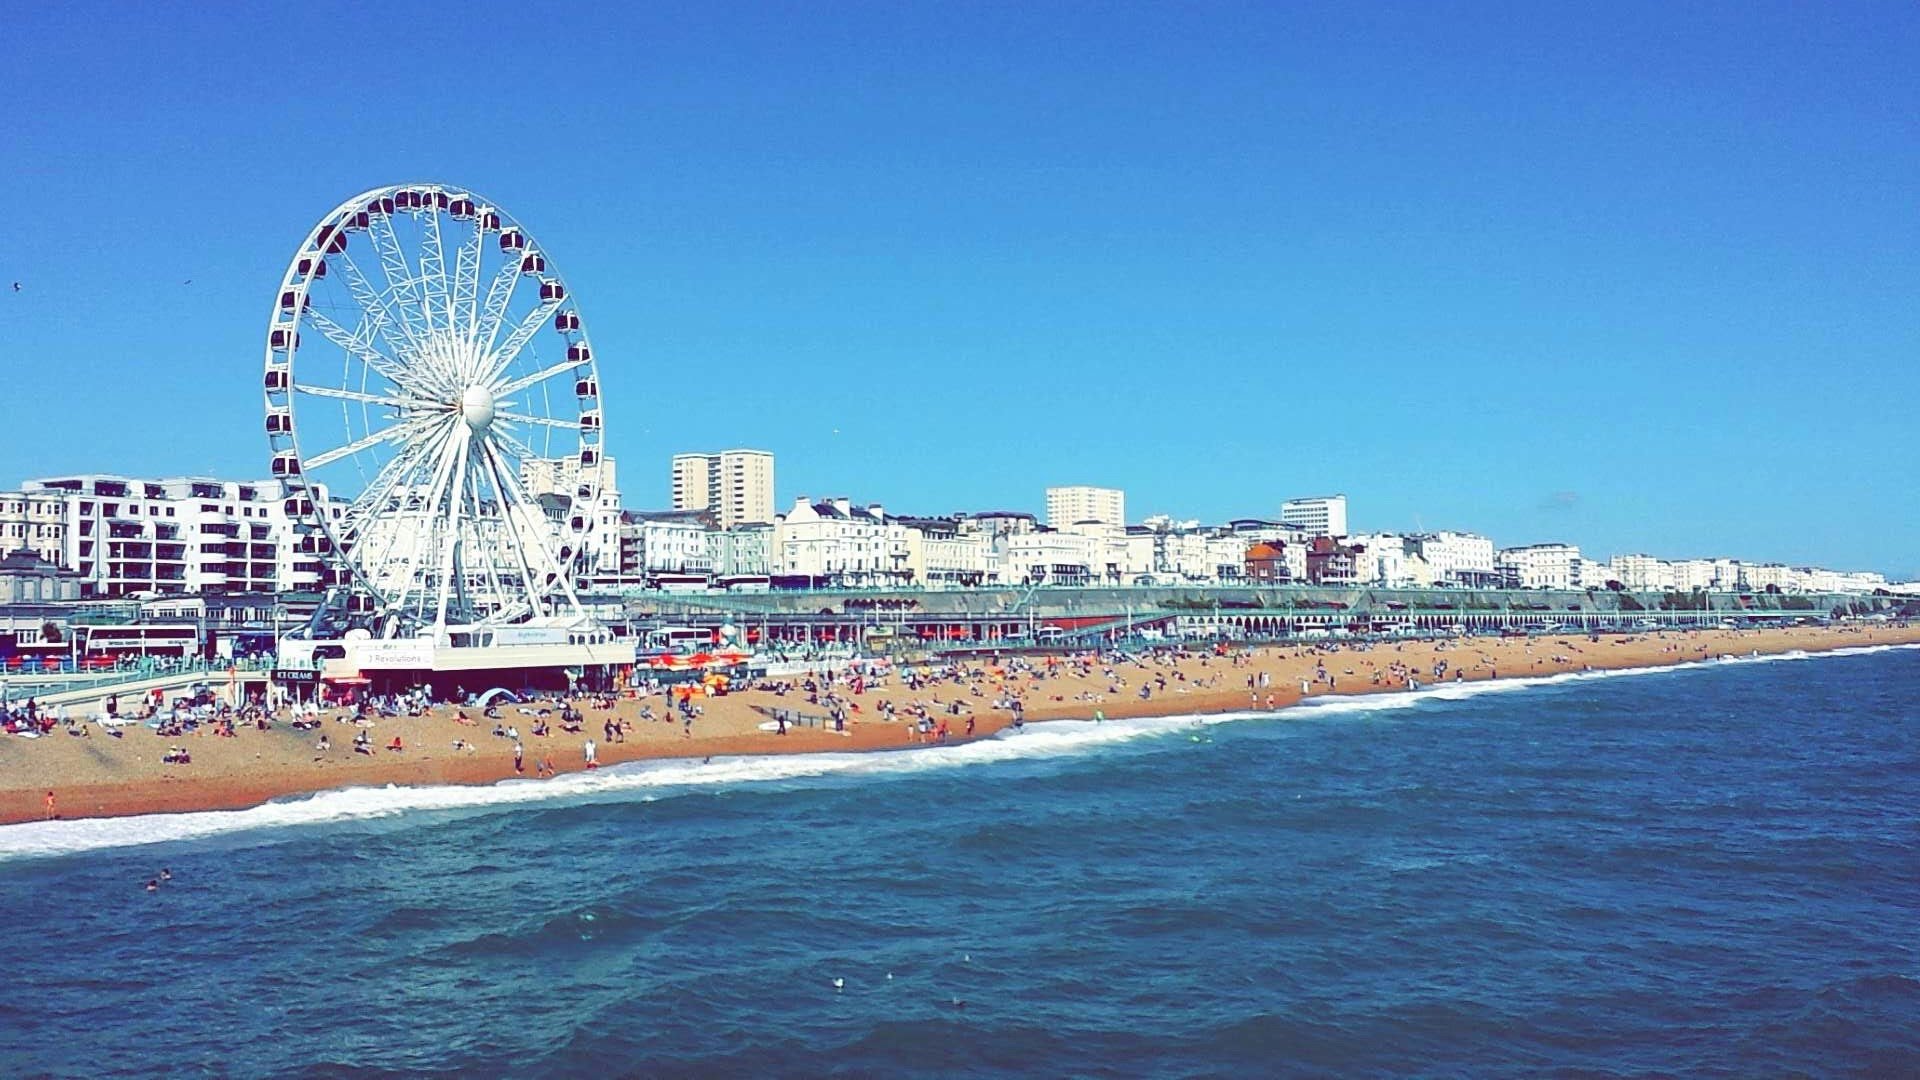 view of brighton beach with the big wheel in the sunshine